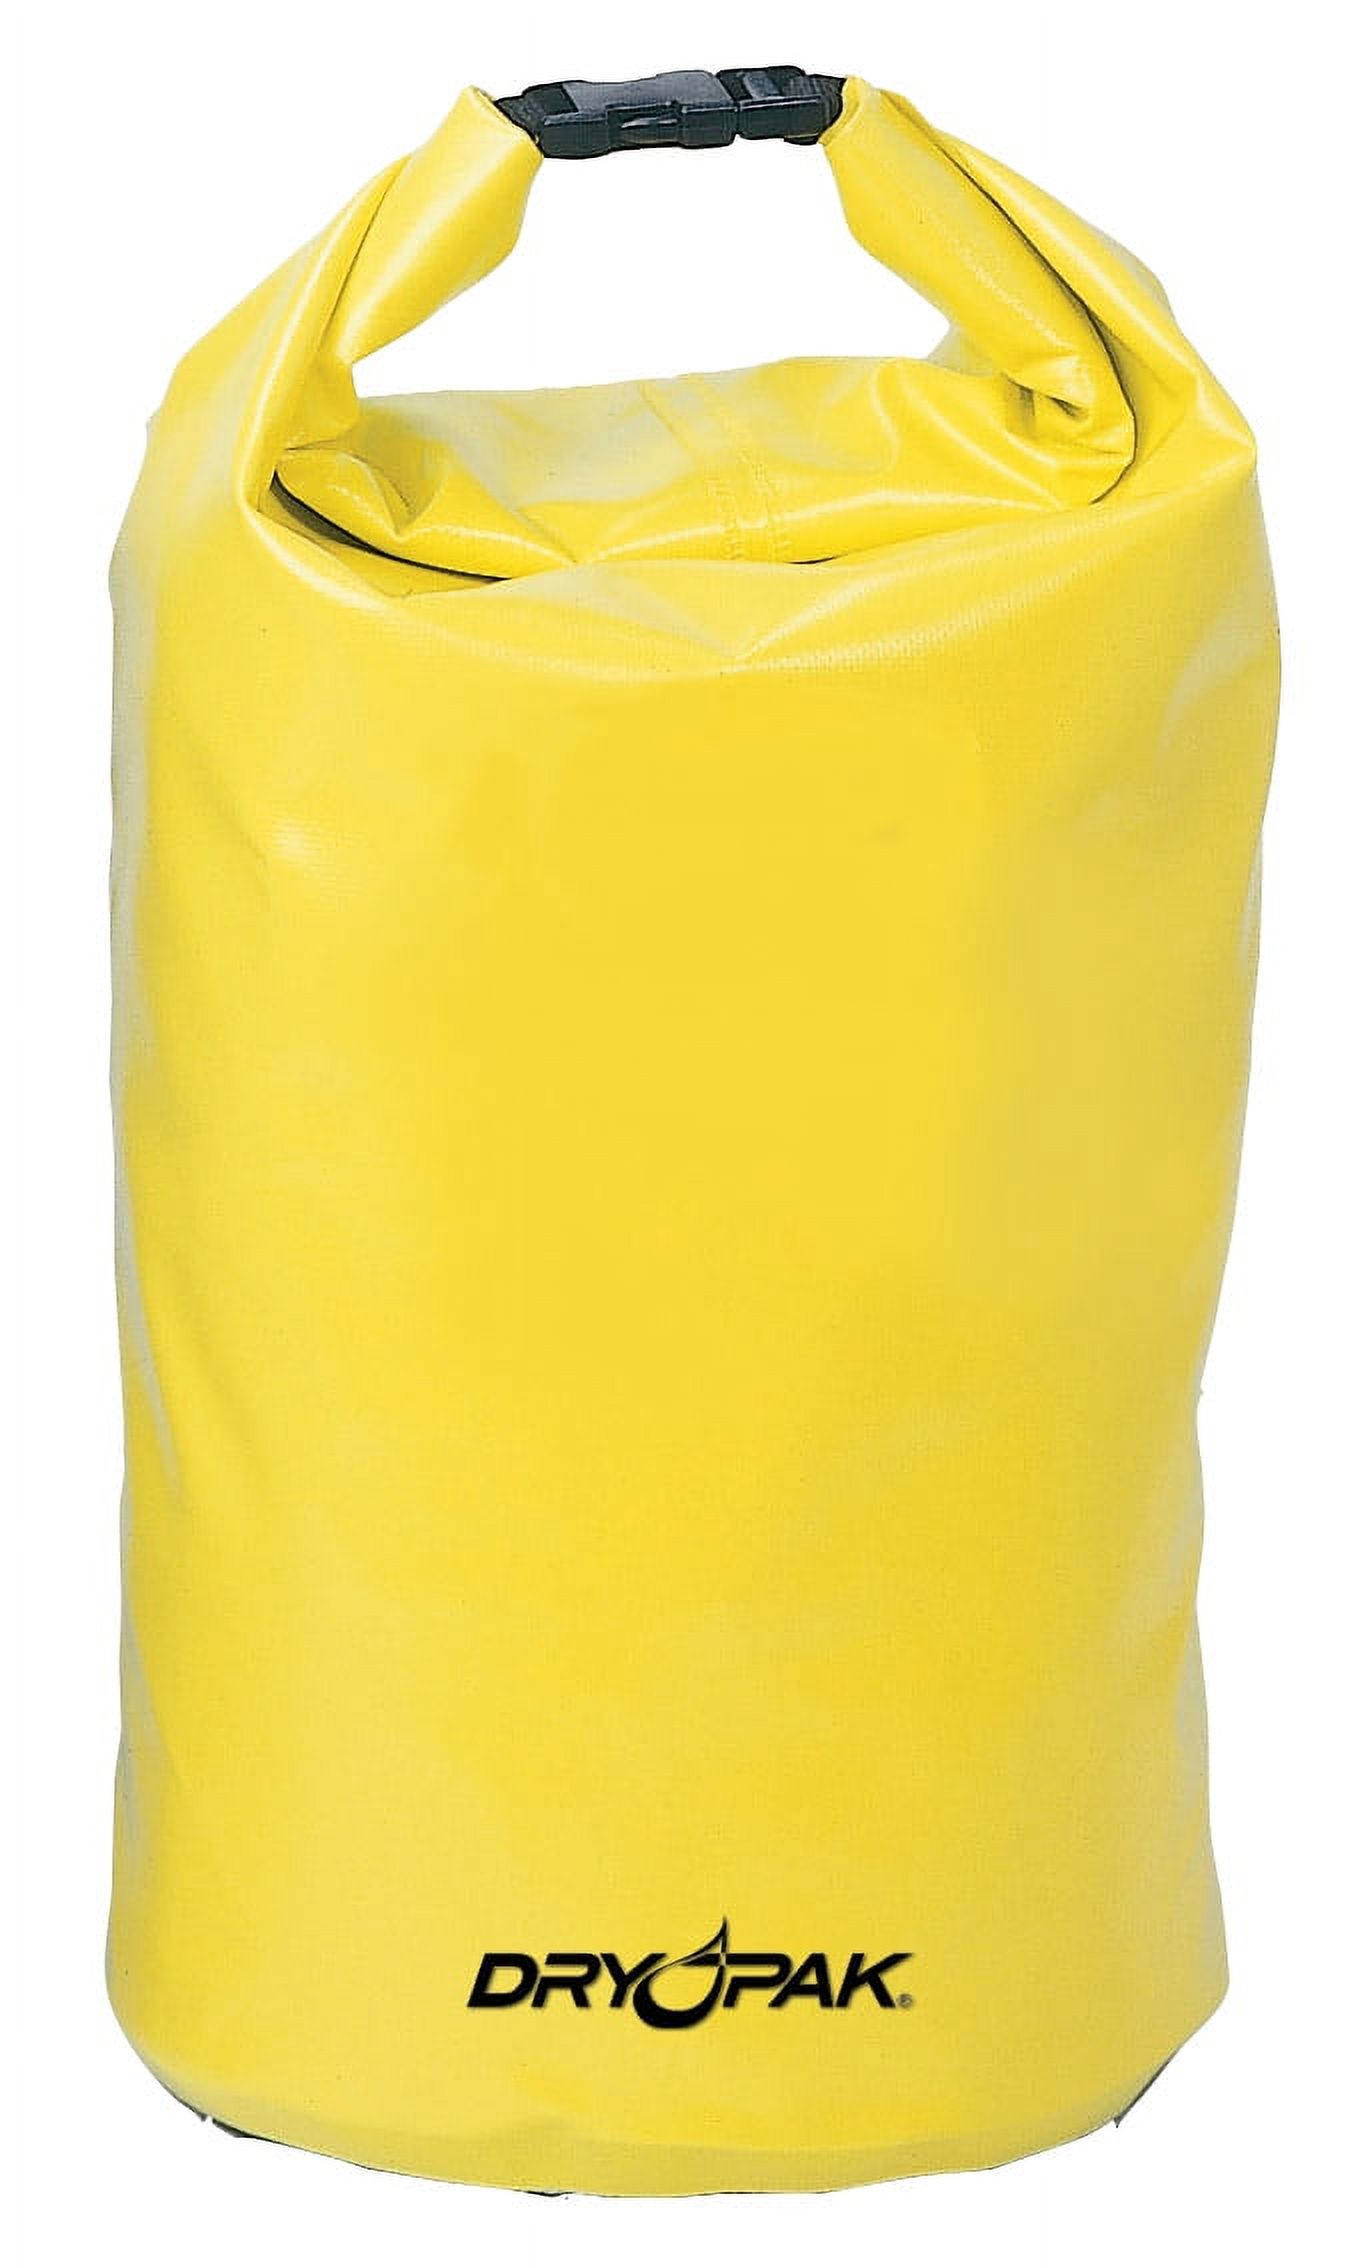 DRY PAK WB-4 Roll Top Dry Gear Bag, Yellow, 11.5 x 19-Inch - image 1 of 3